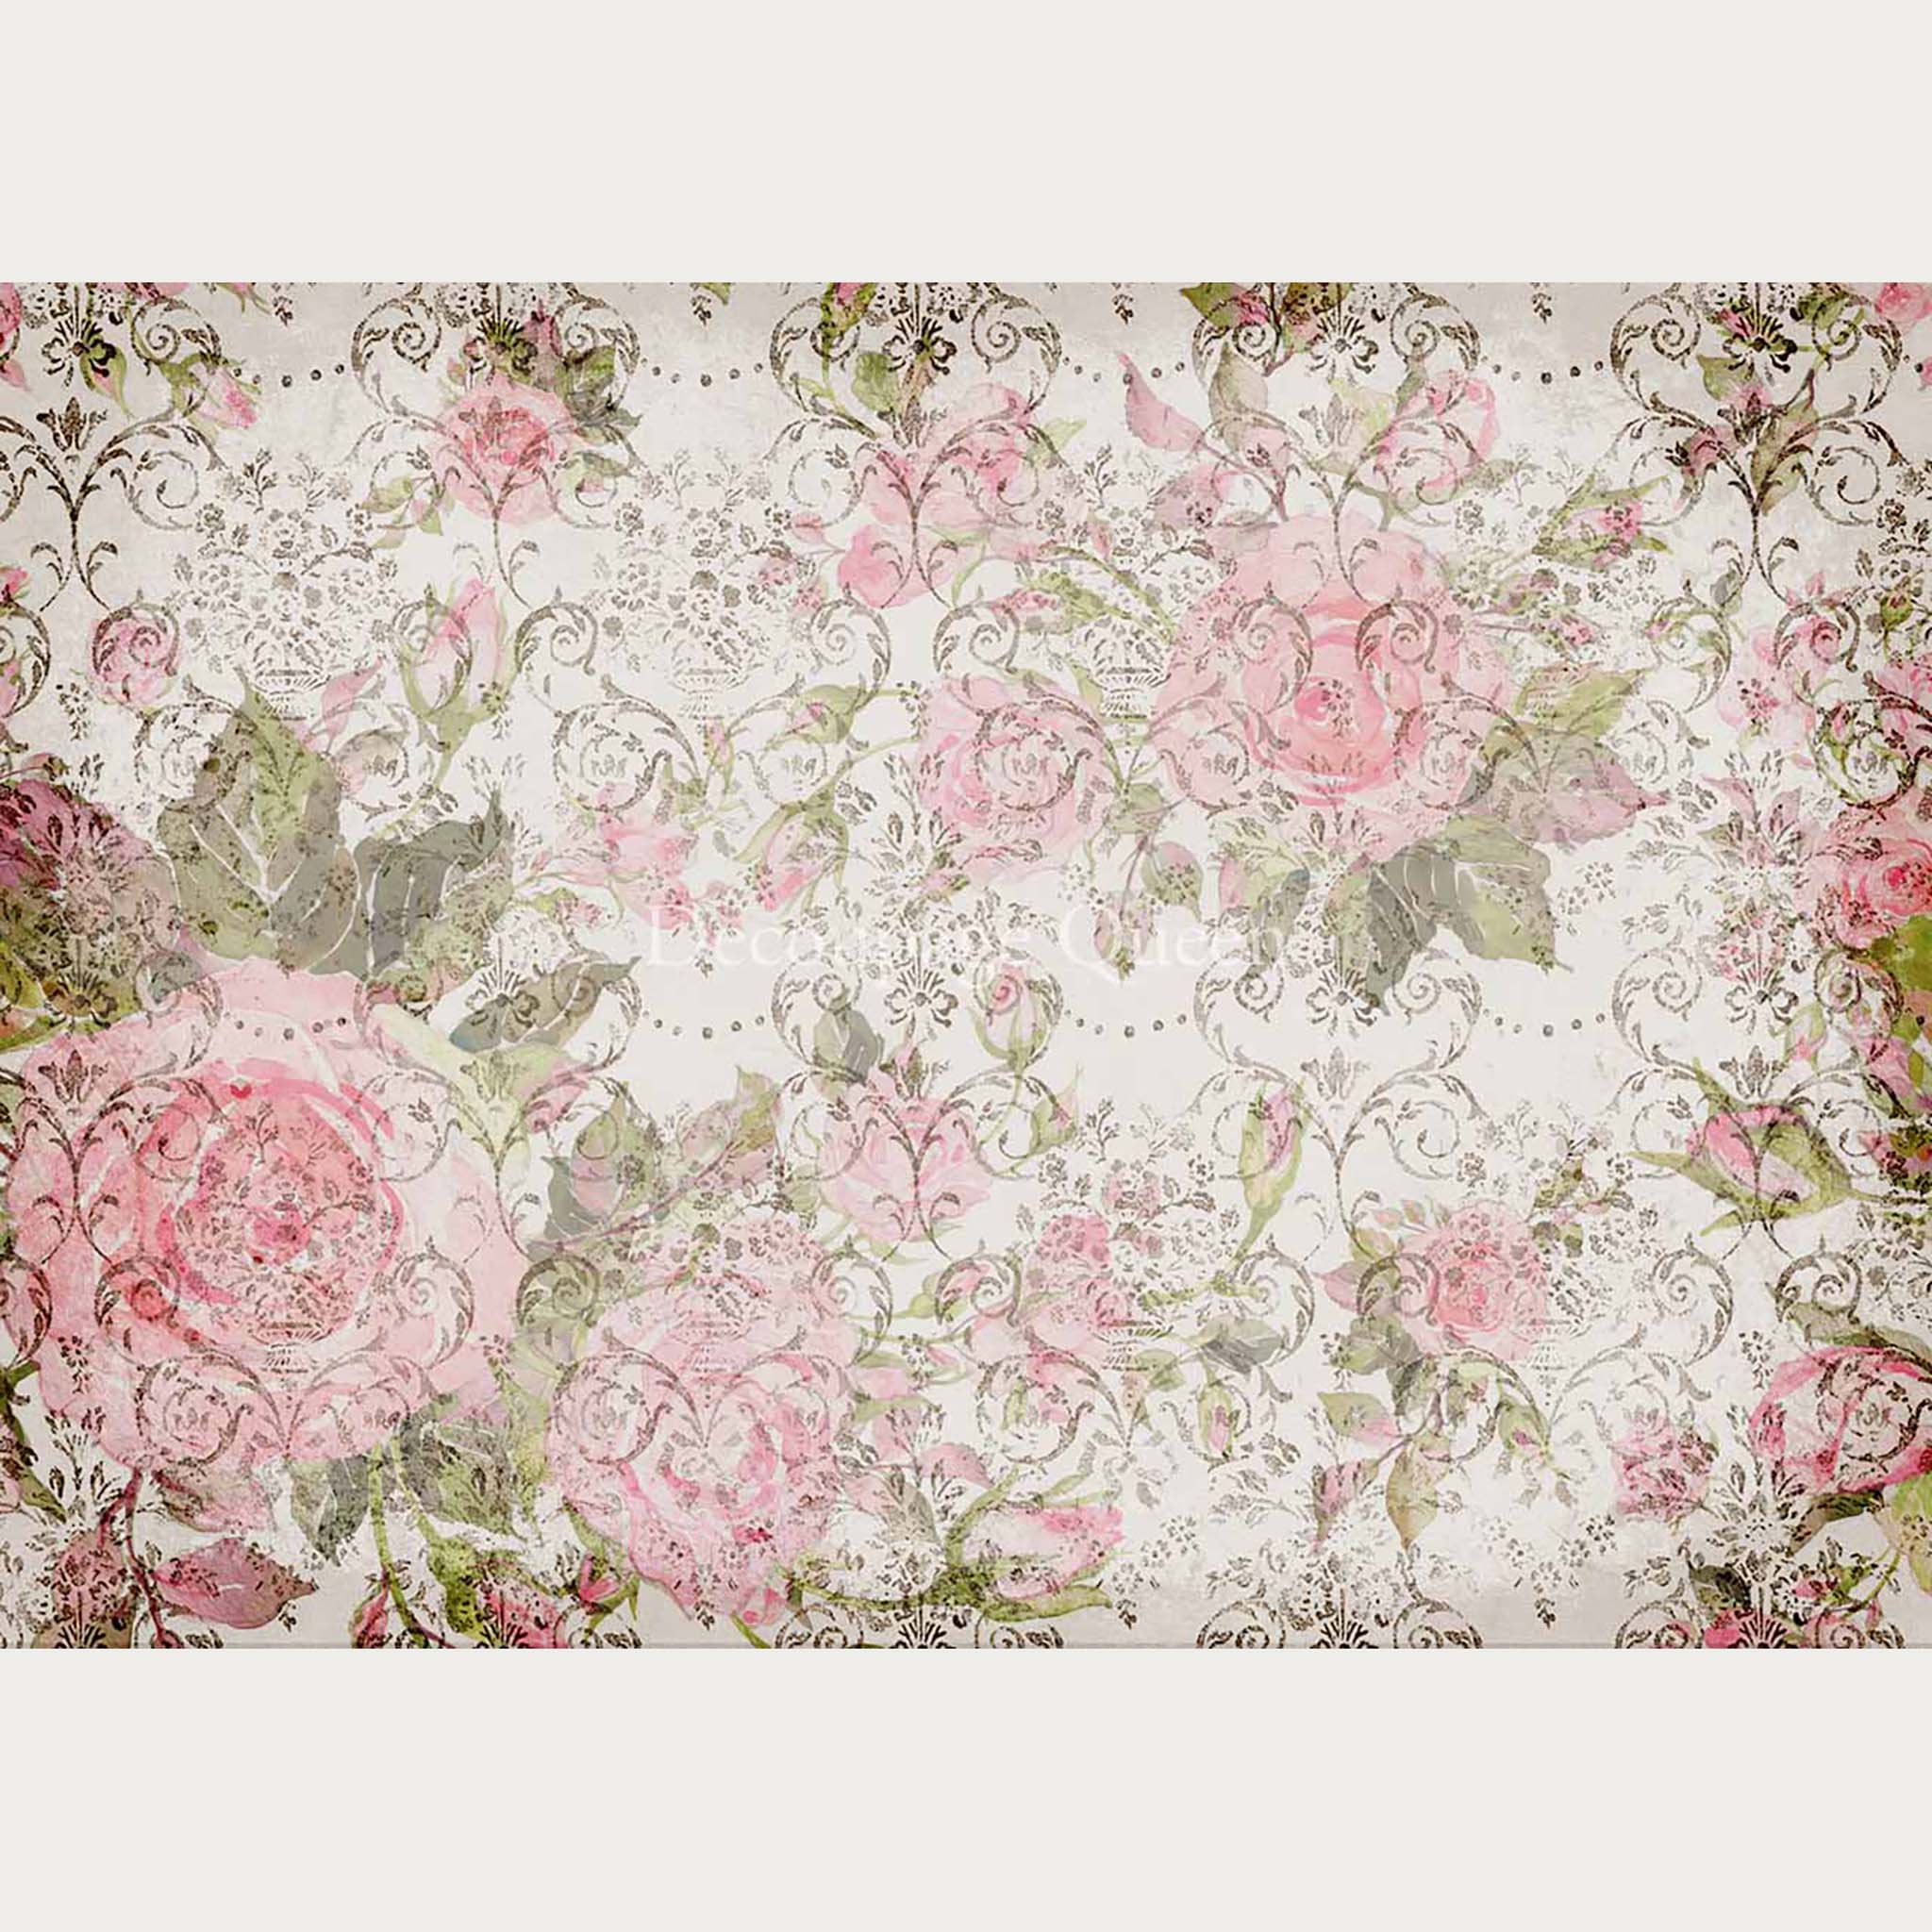 A1 rice paper design that features a repeating dark scroll pattern overlayed on large faded pink roses. White borders are on the top and bottom.